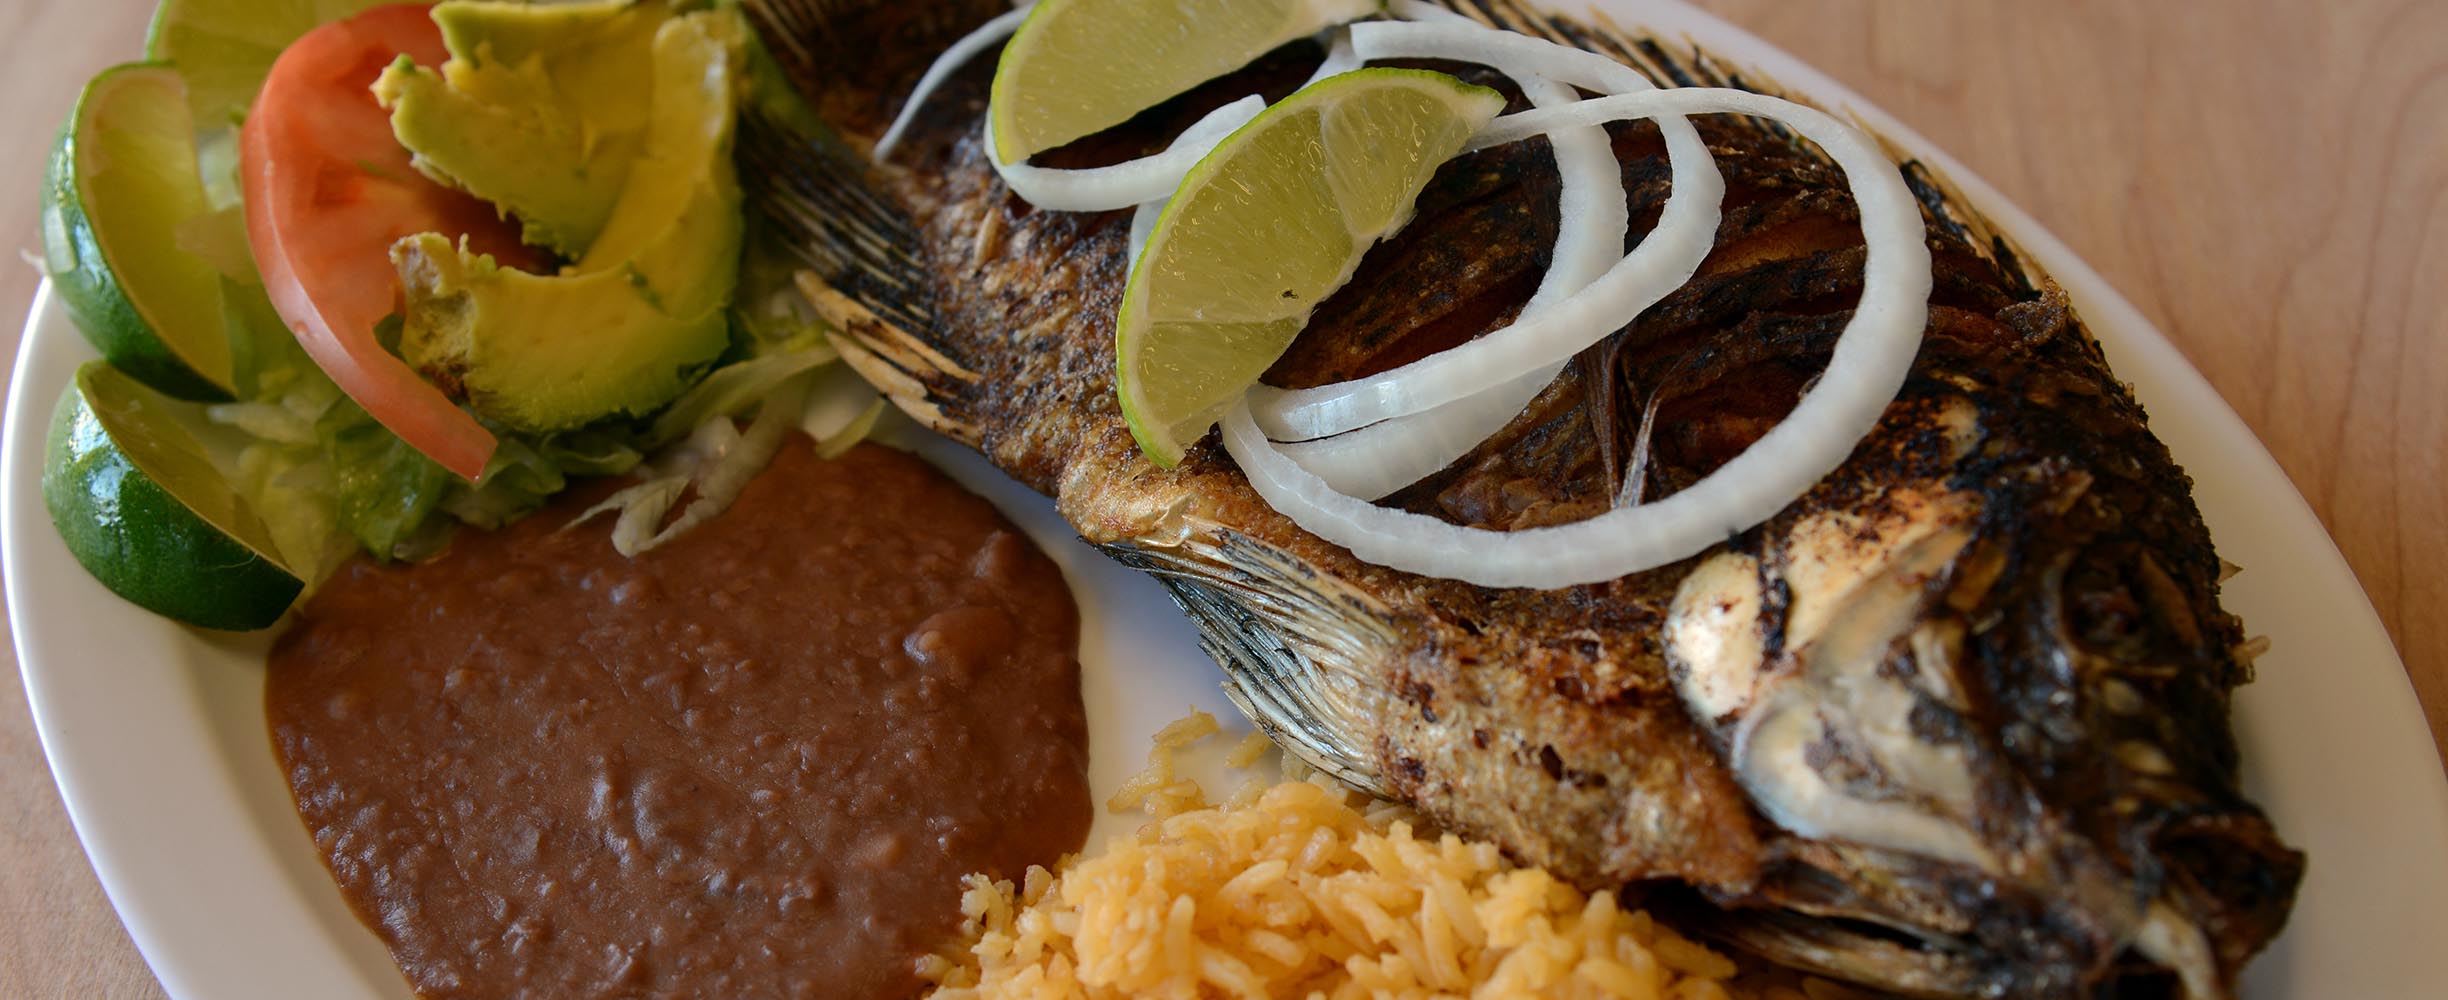 Fried whole fish, a delicious Mexican and Salvadoran seafood dish.